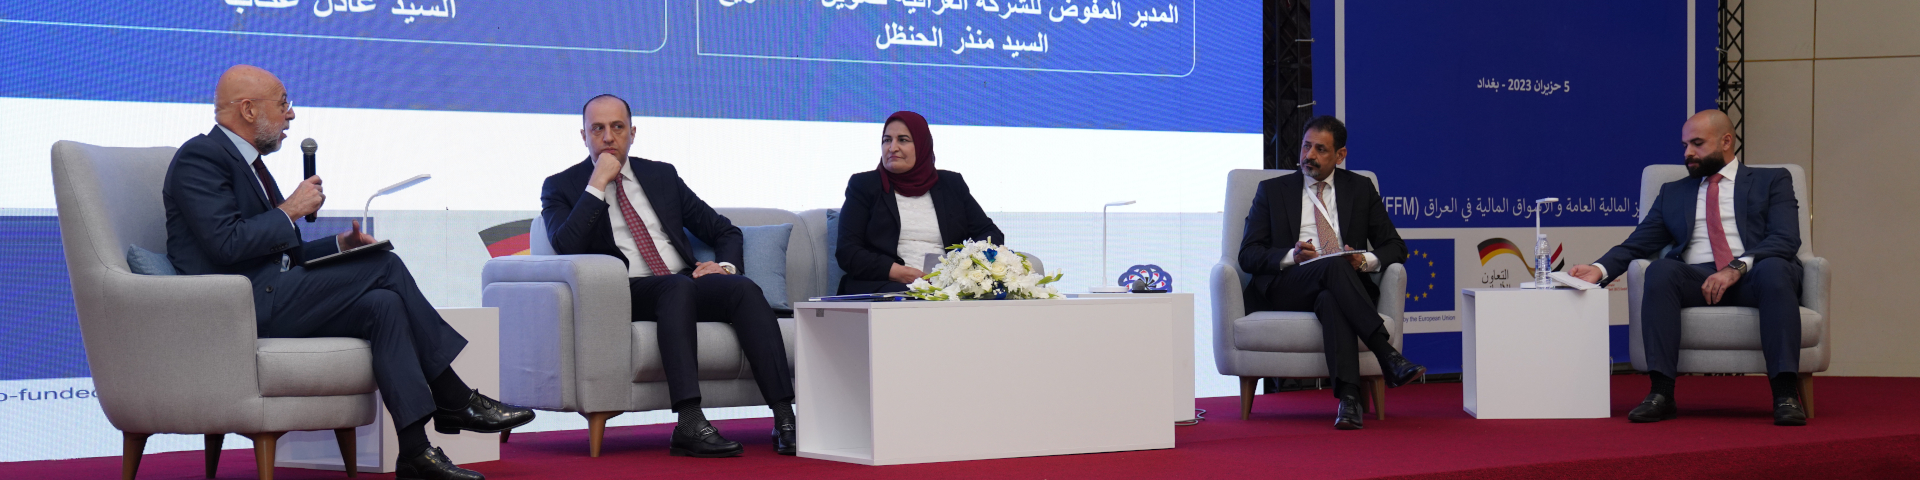 Four representatives of the Iraqi Central Bank, the banking sector and industry take part in a panel discussion. Copyright: Al-Nawaiir Event Management Agency